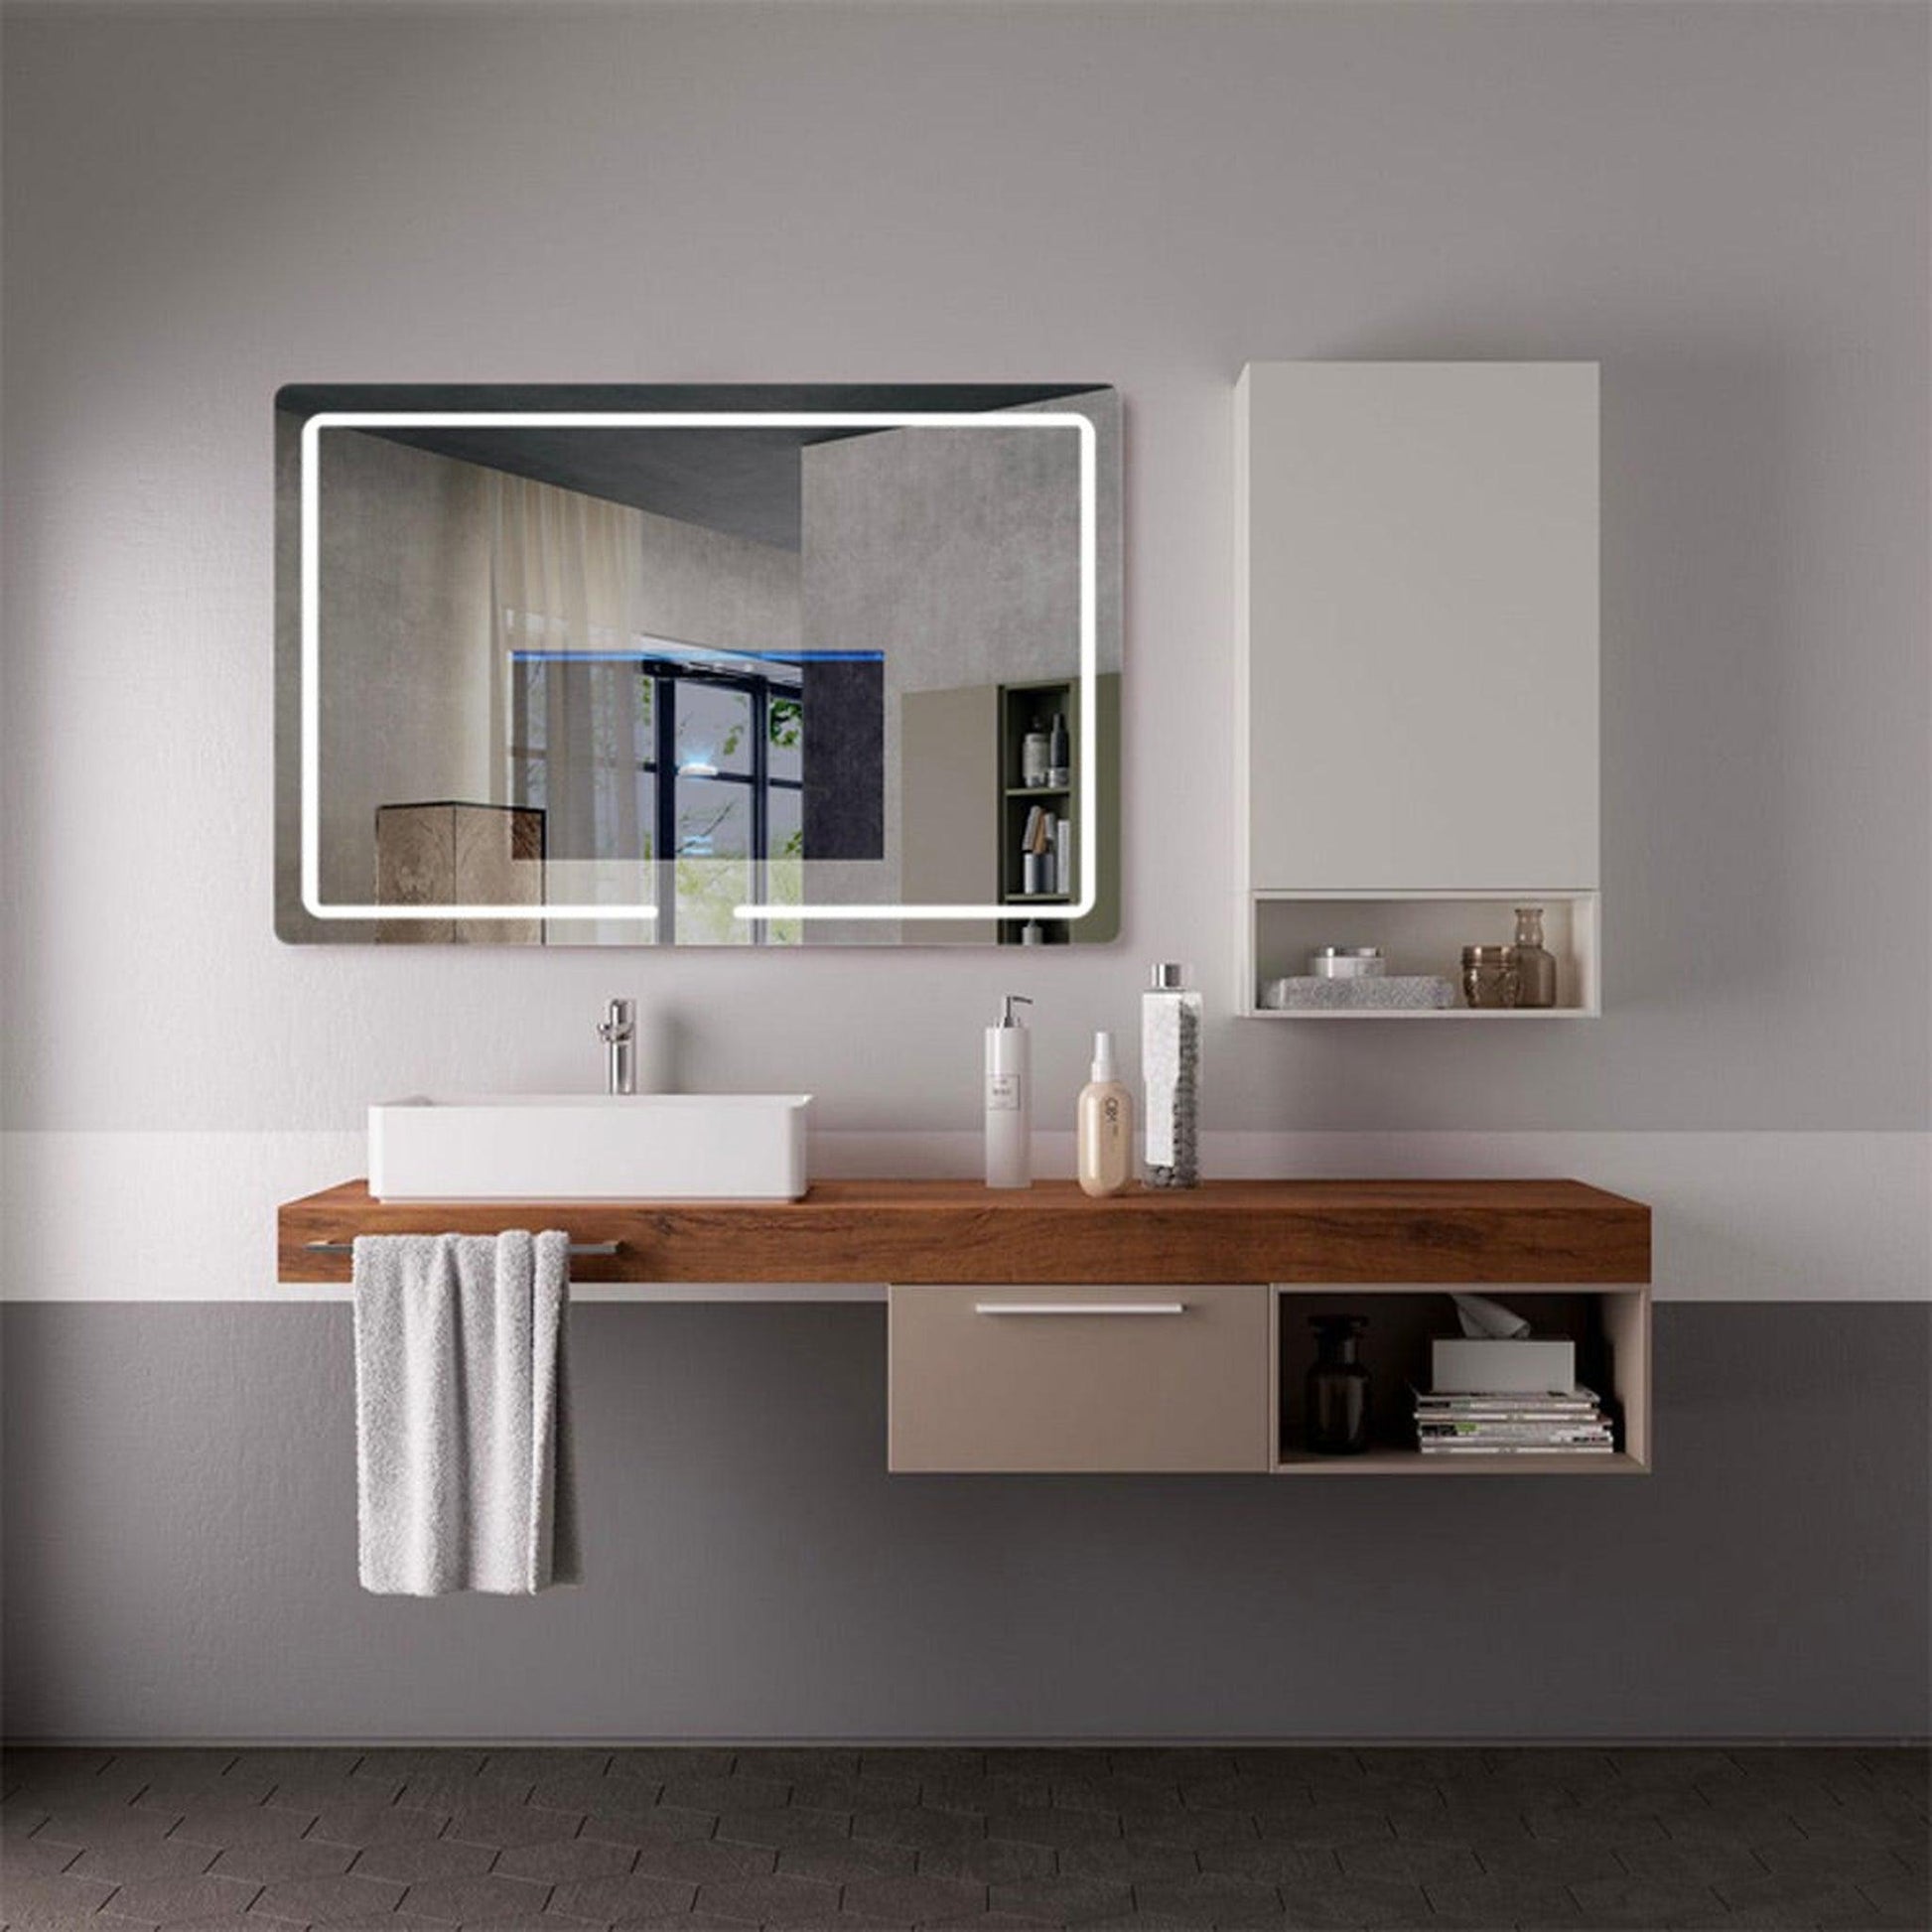 Aquadom Vision 48" x 32" Smart LED Lighted Bathroom Mirror With Built-in TV and Defogger